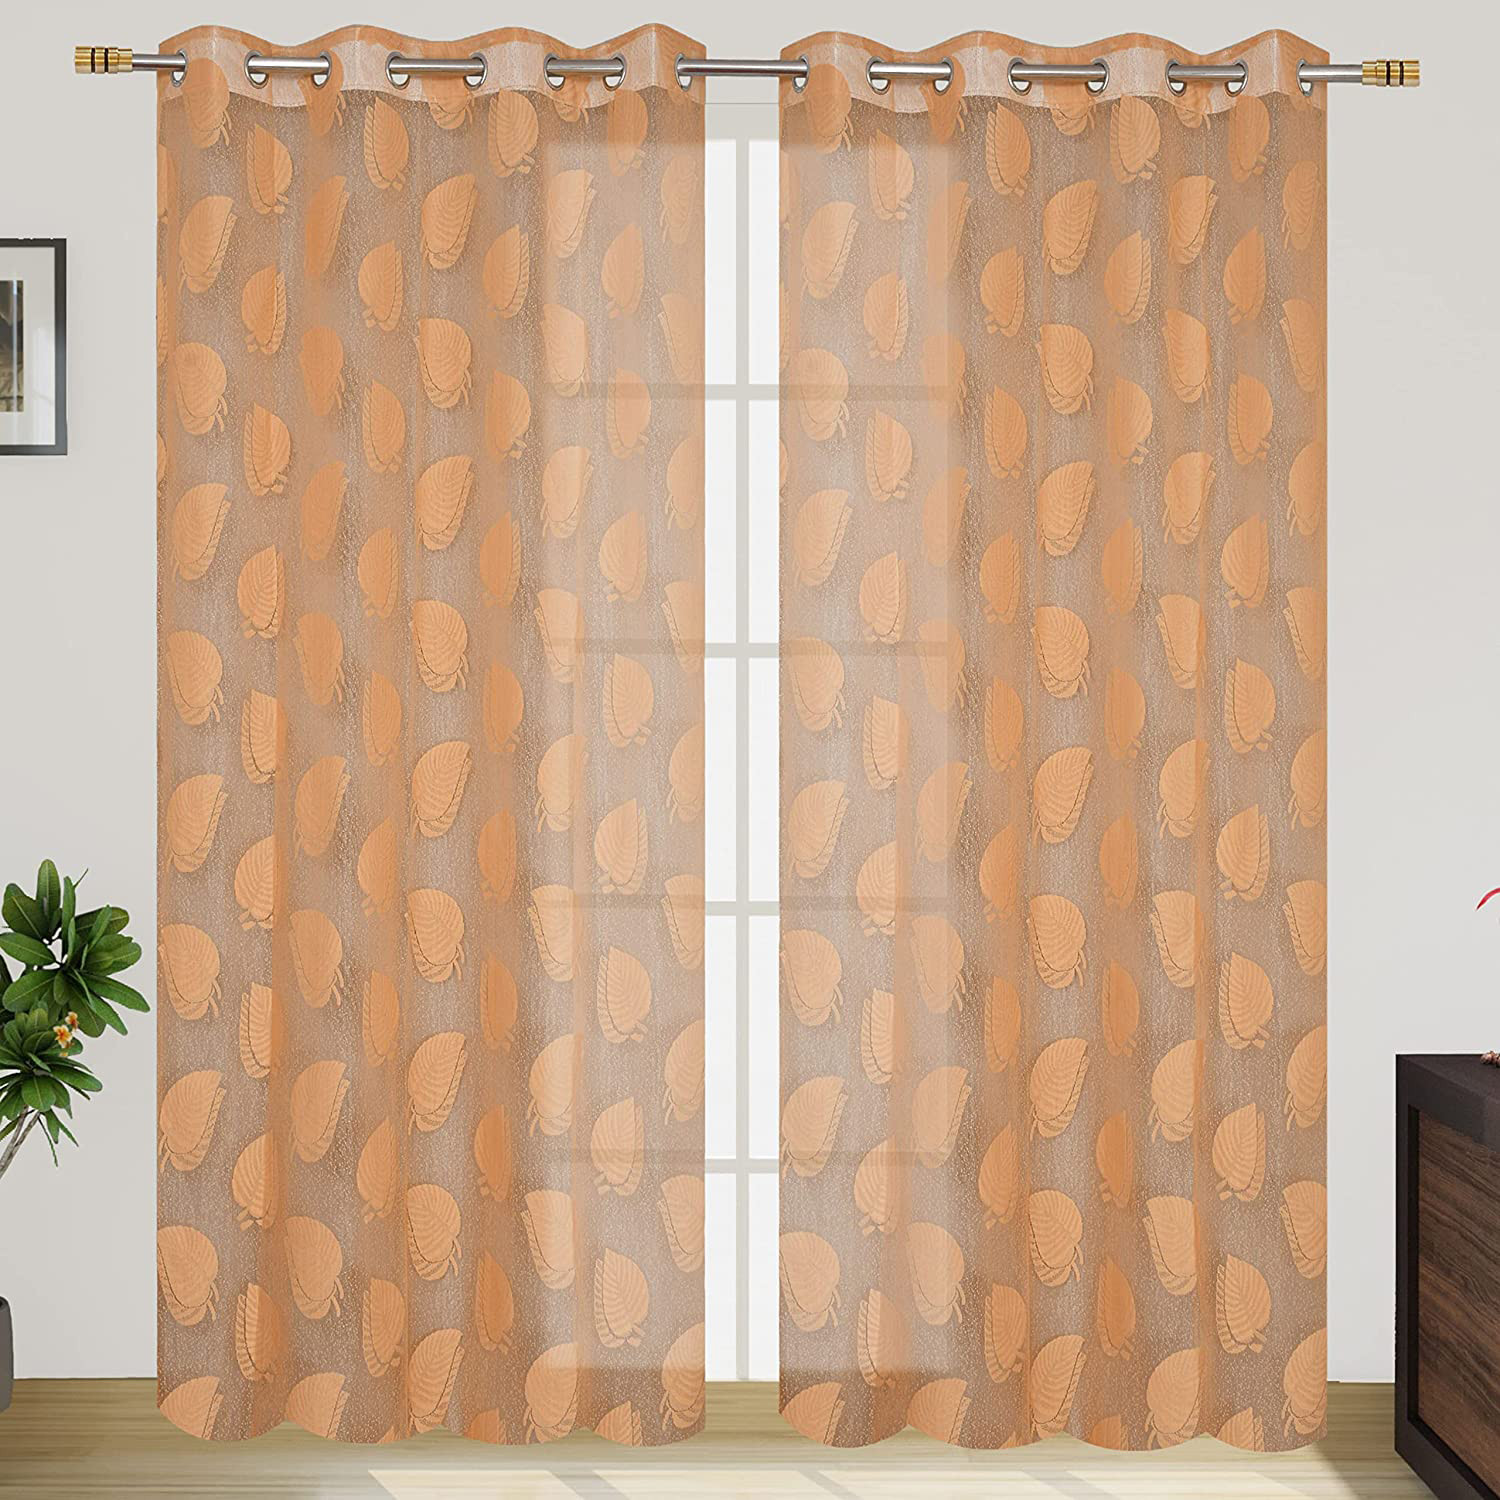 Kuber Industries Leaf Print Home Decor Cotton Door Curtain With 8 Eyeletss, 7 Feet (Brown)